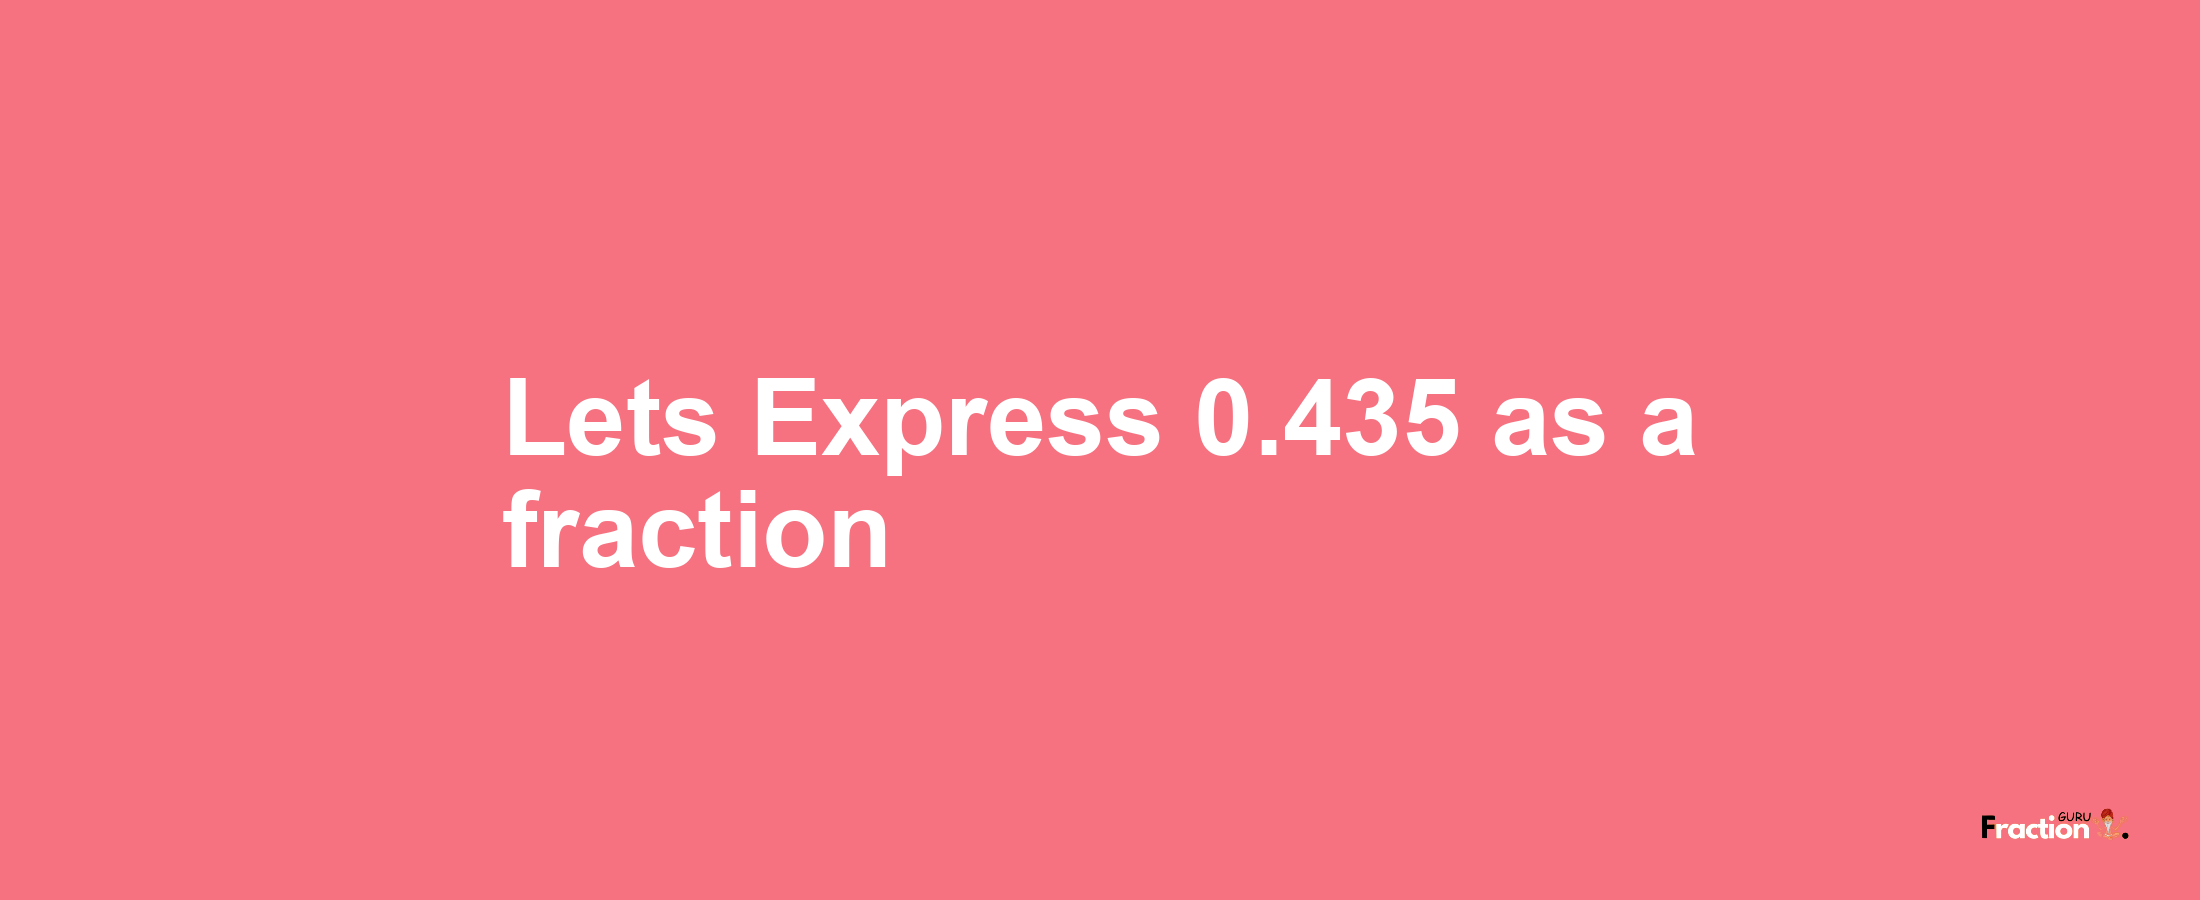 Lets Express 0.435 as afraction